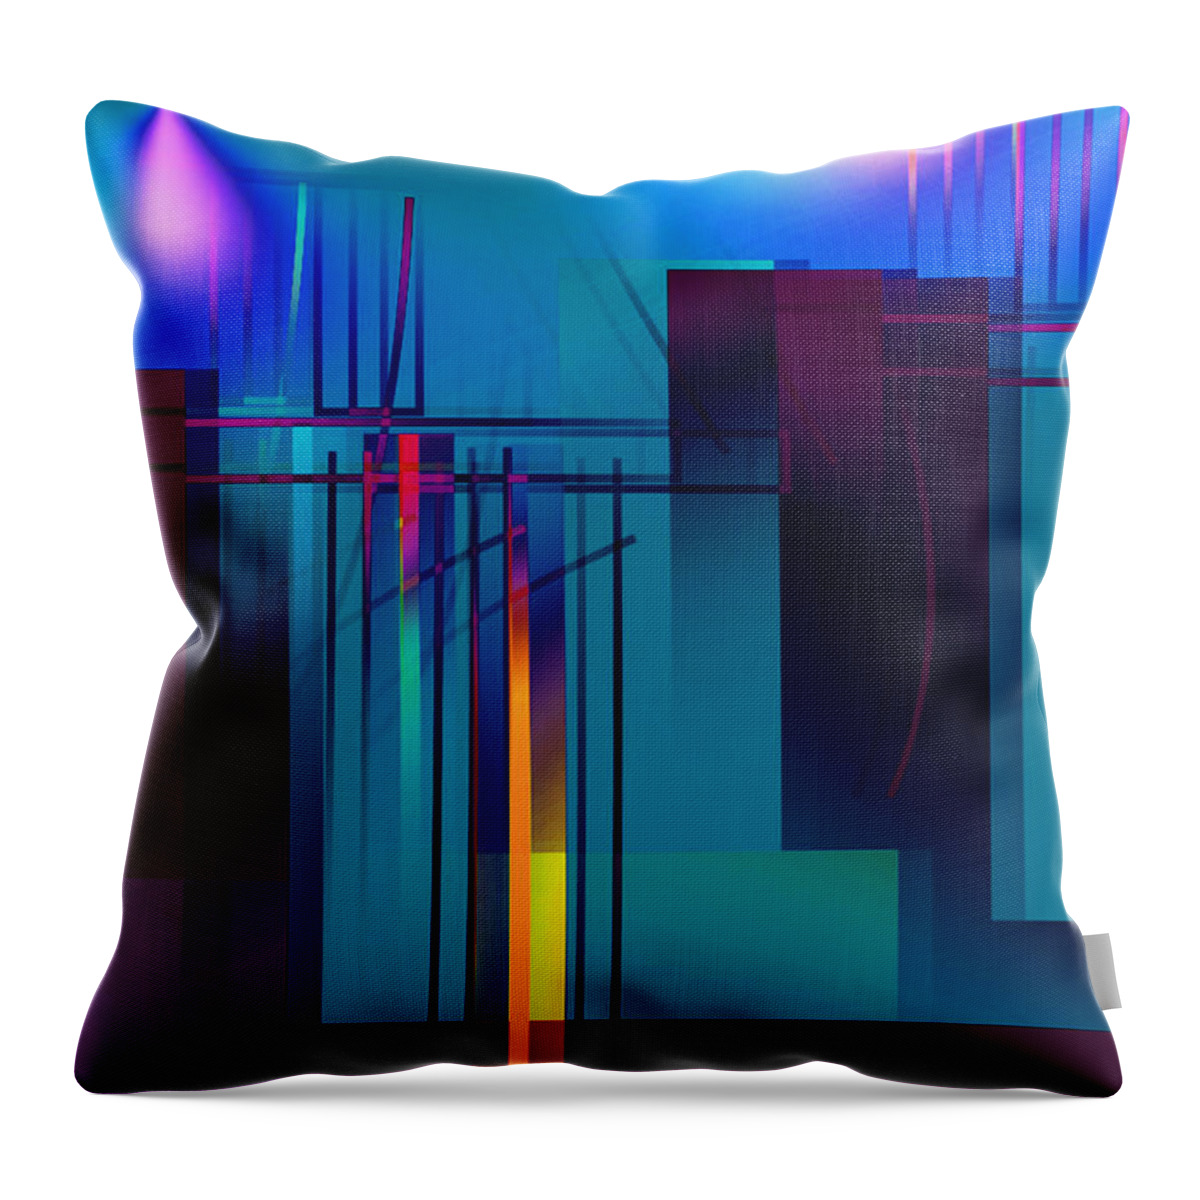 Abstract Throw Pillow featuring the digital art Backstage by John Krakora